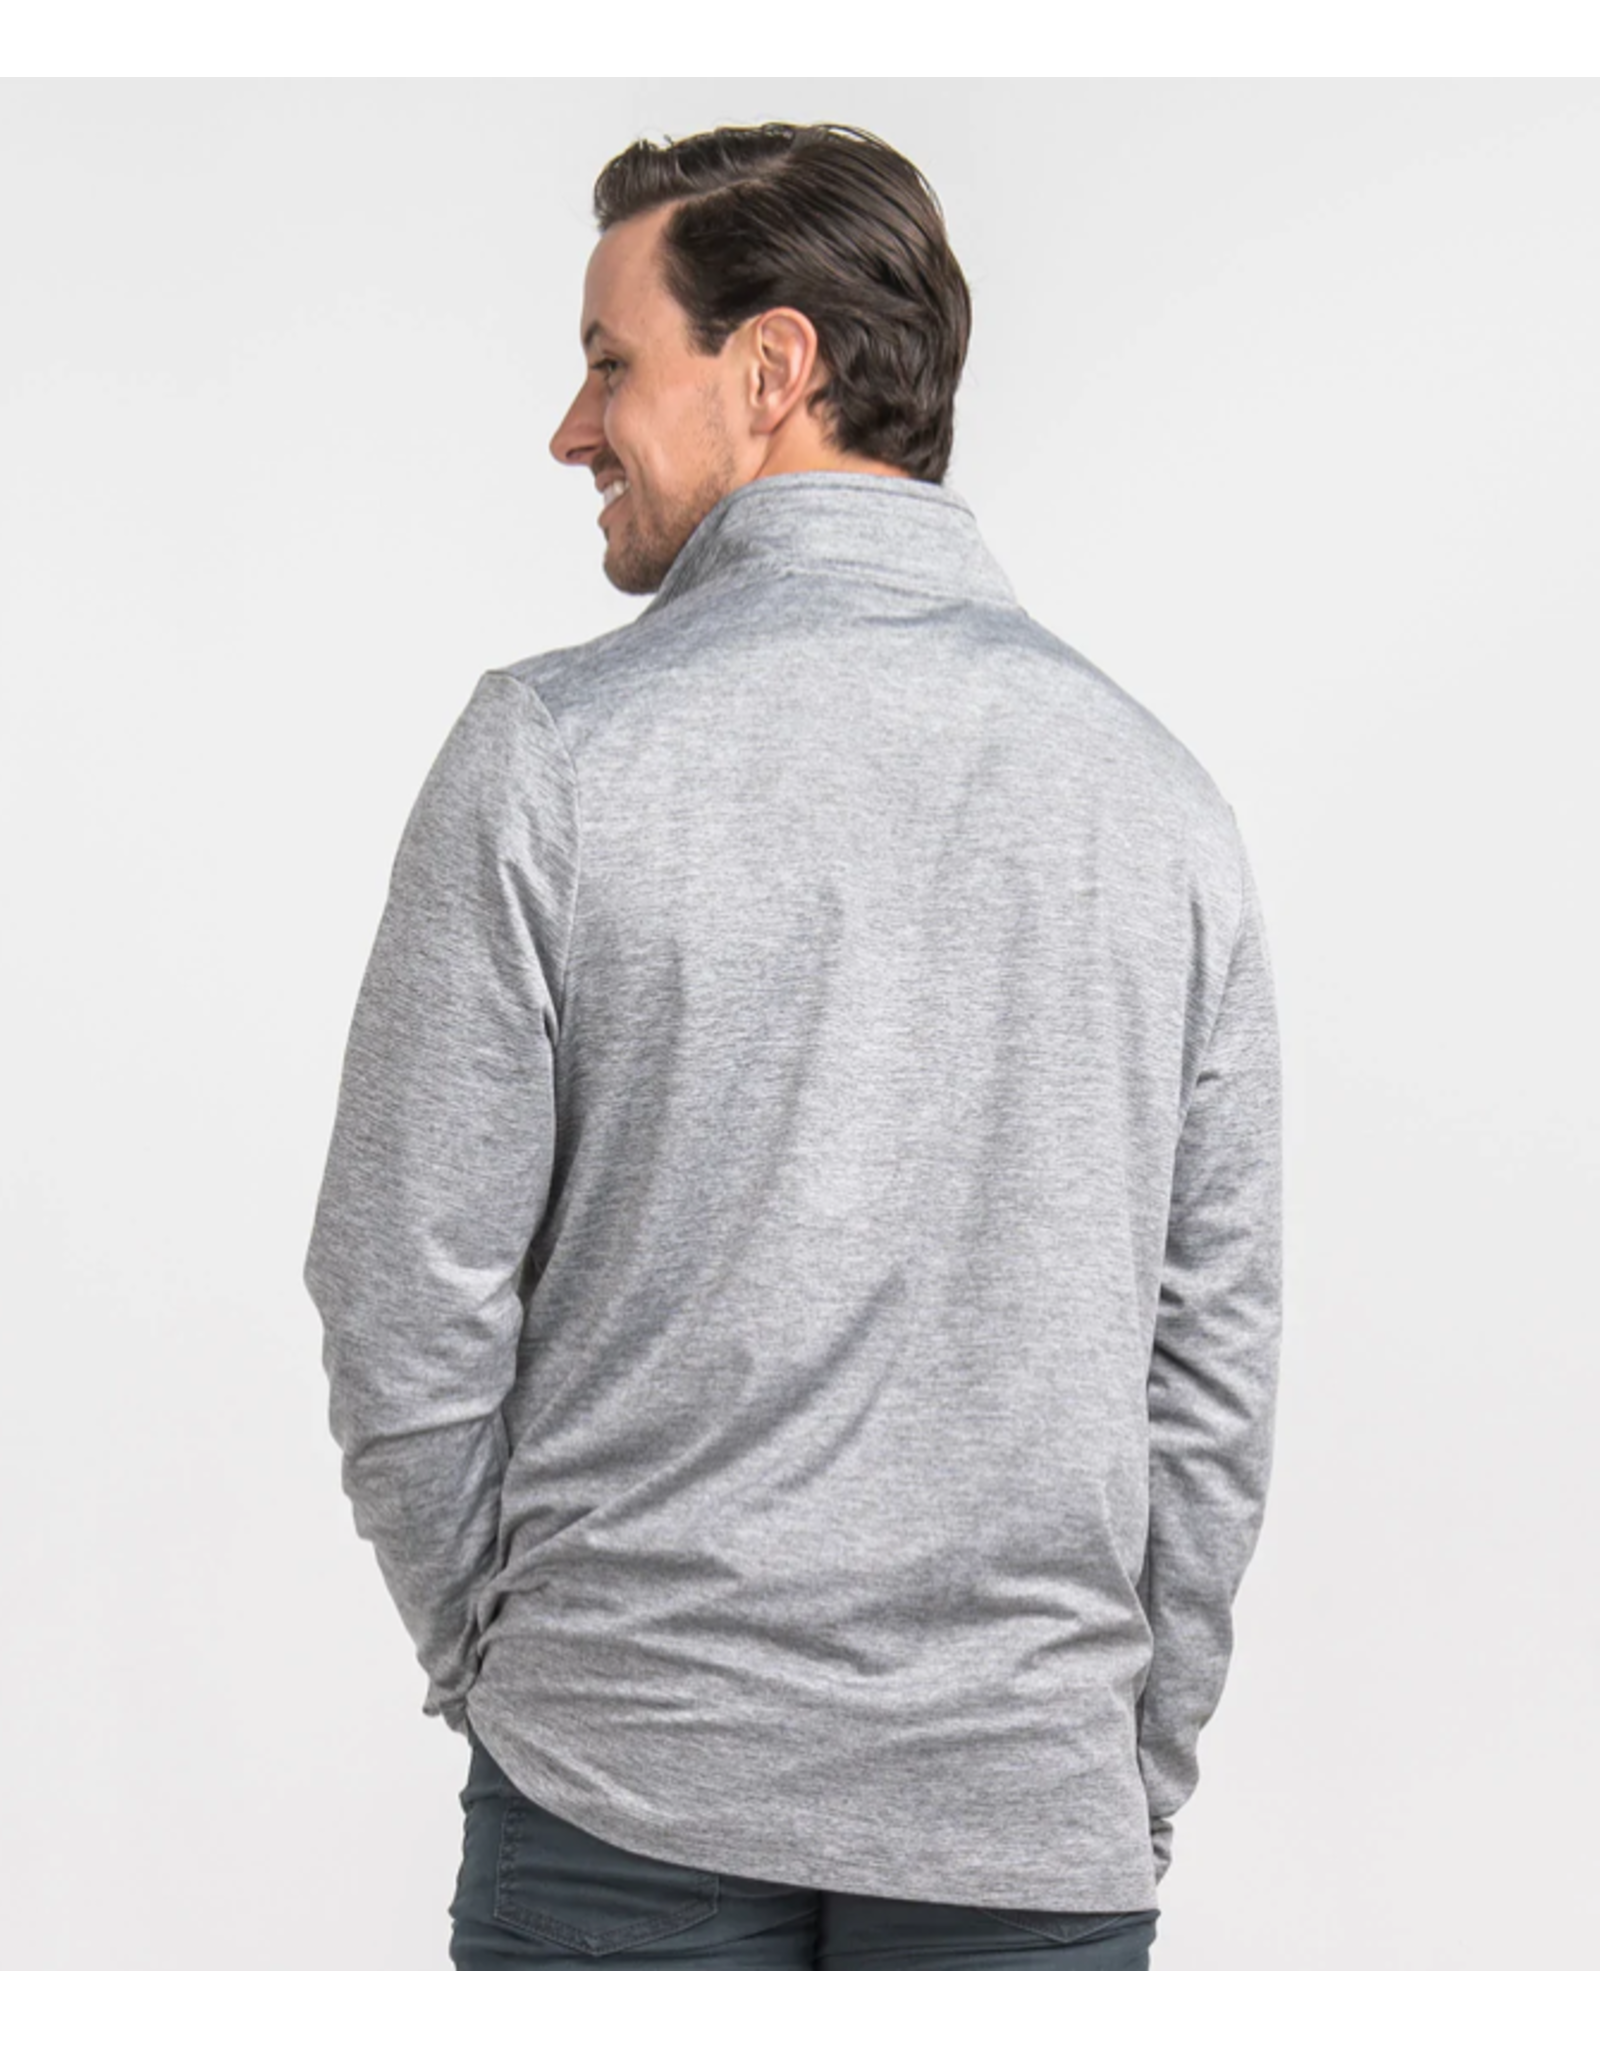 Southern Shirt Company Back Nine Pullover Frost Gray